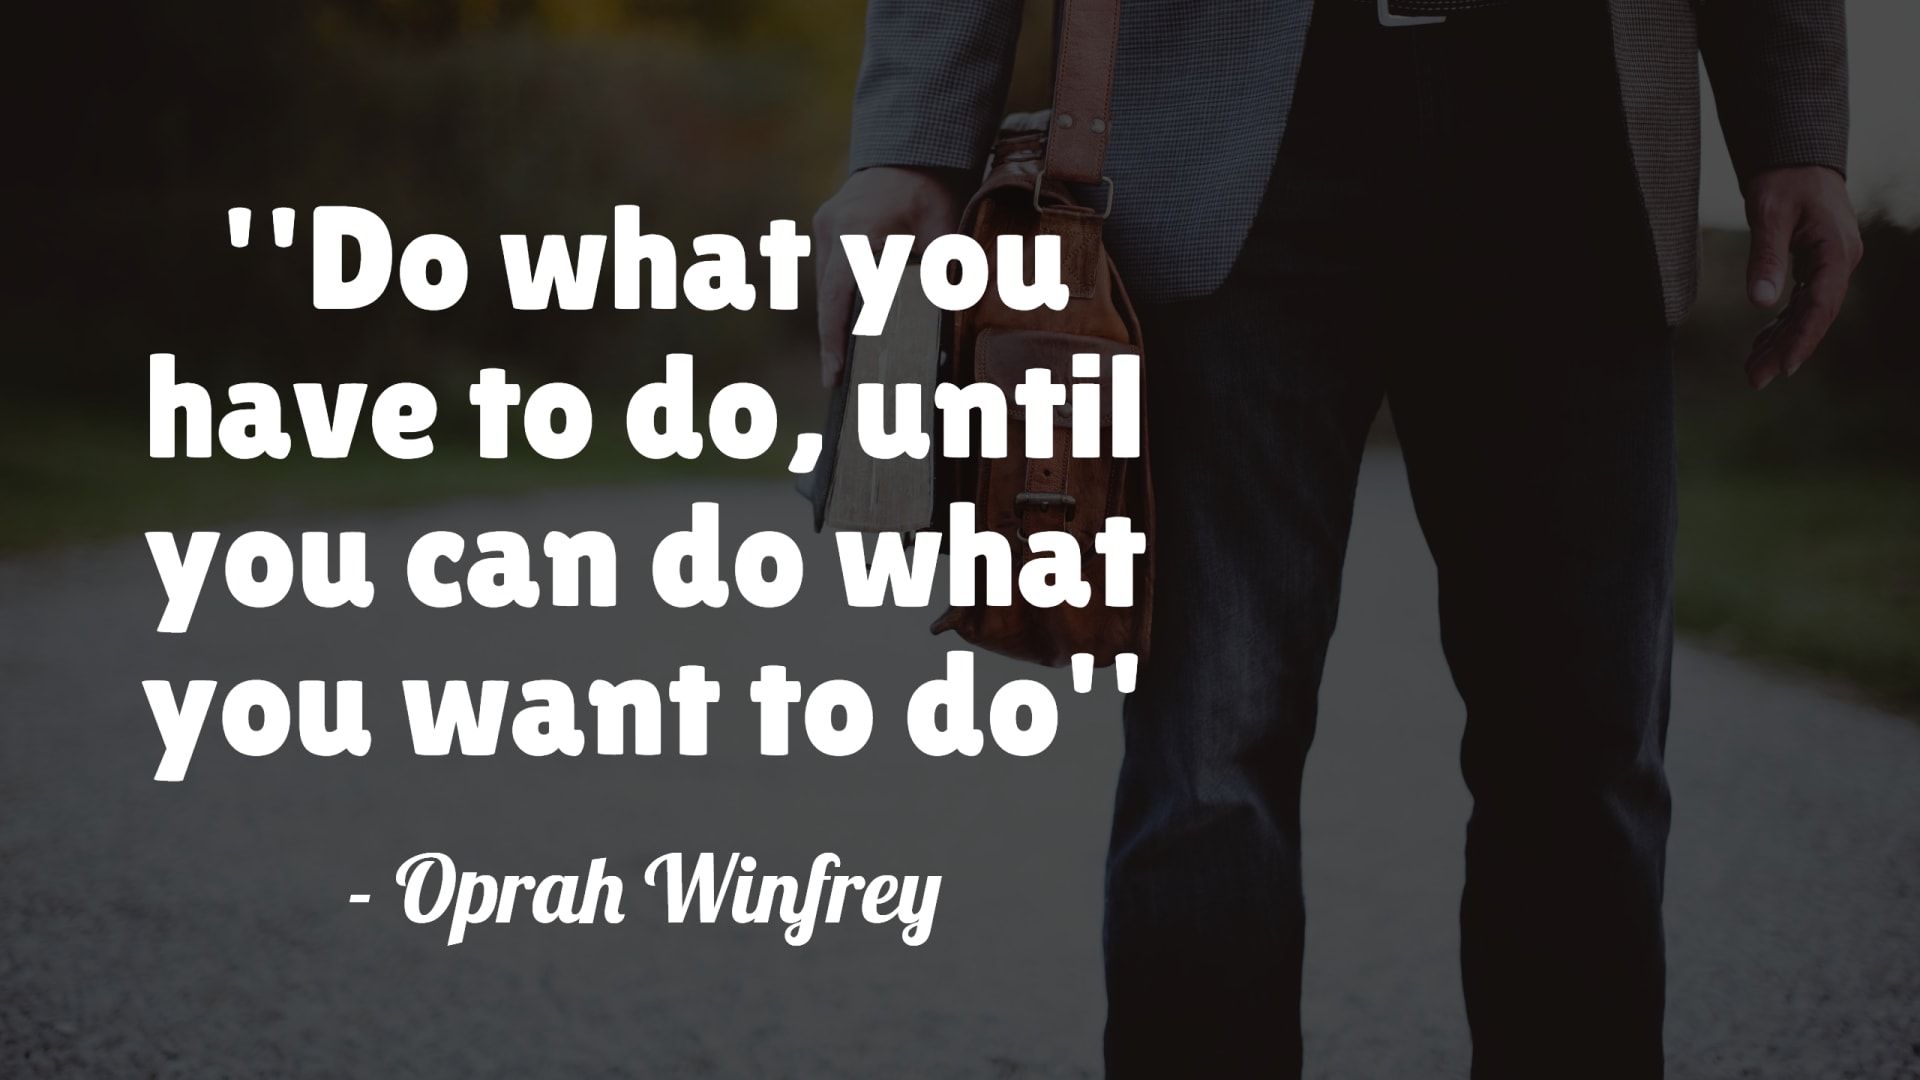 Do what you have to do until you can do what you want to do - Oprah Winfrey